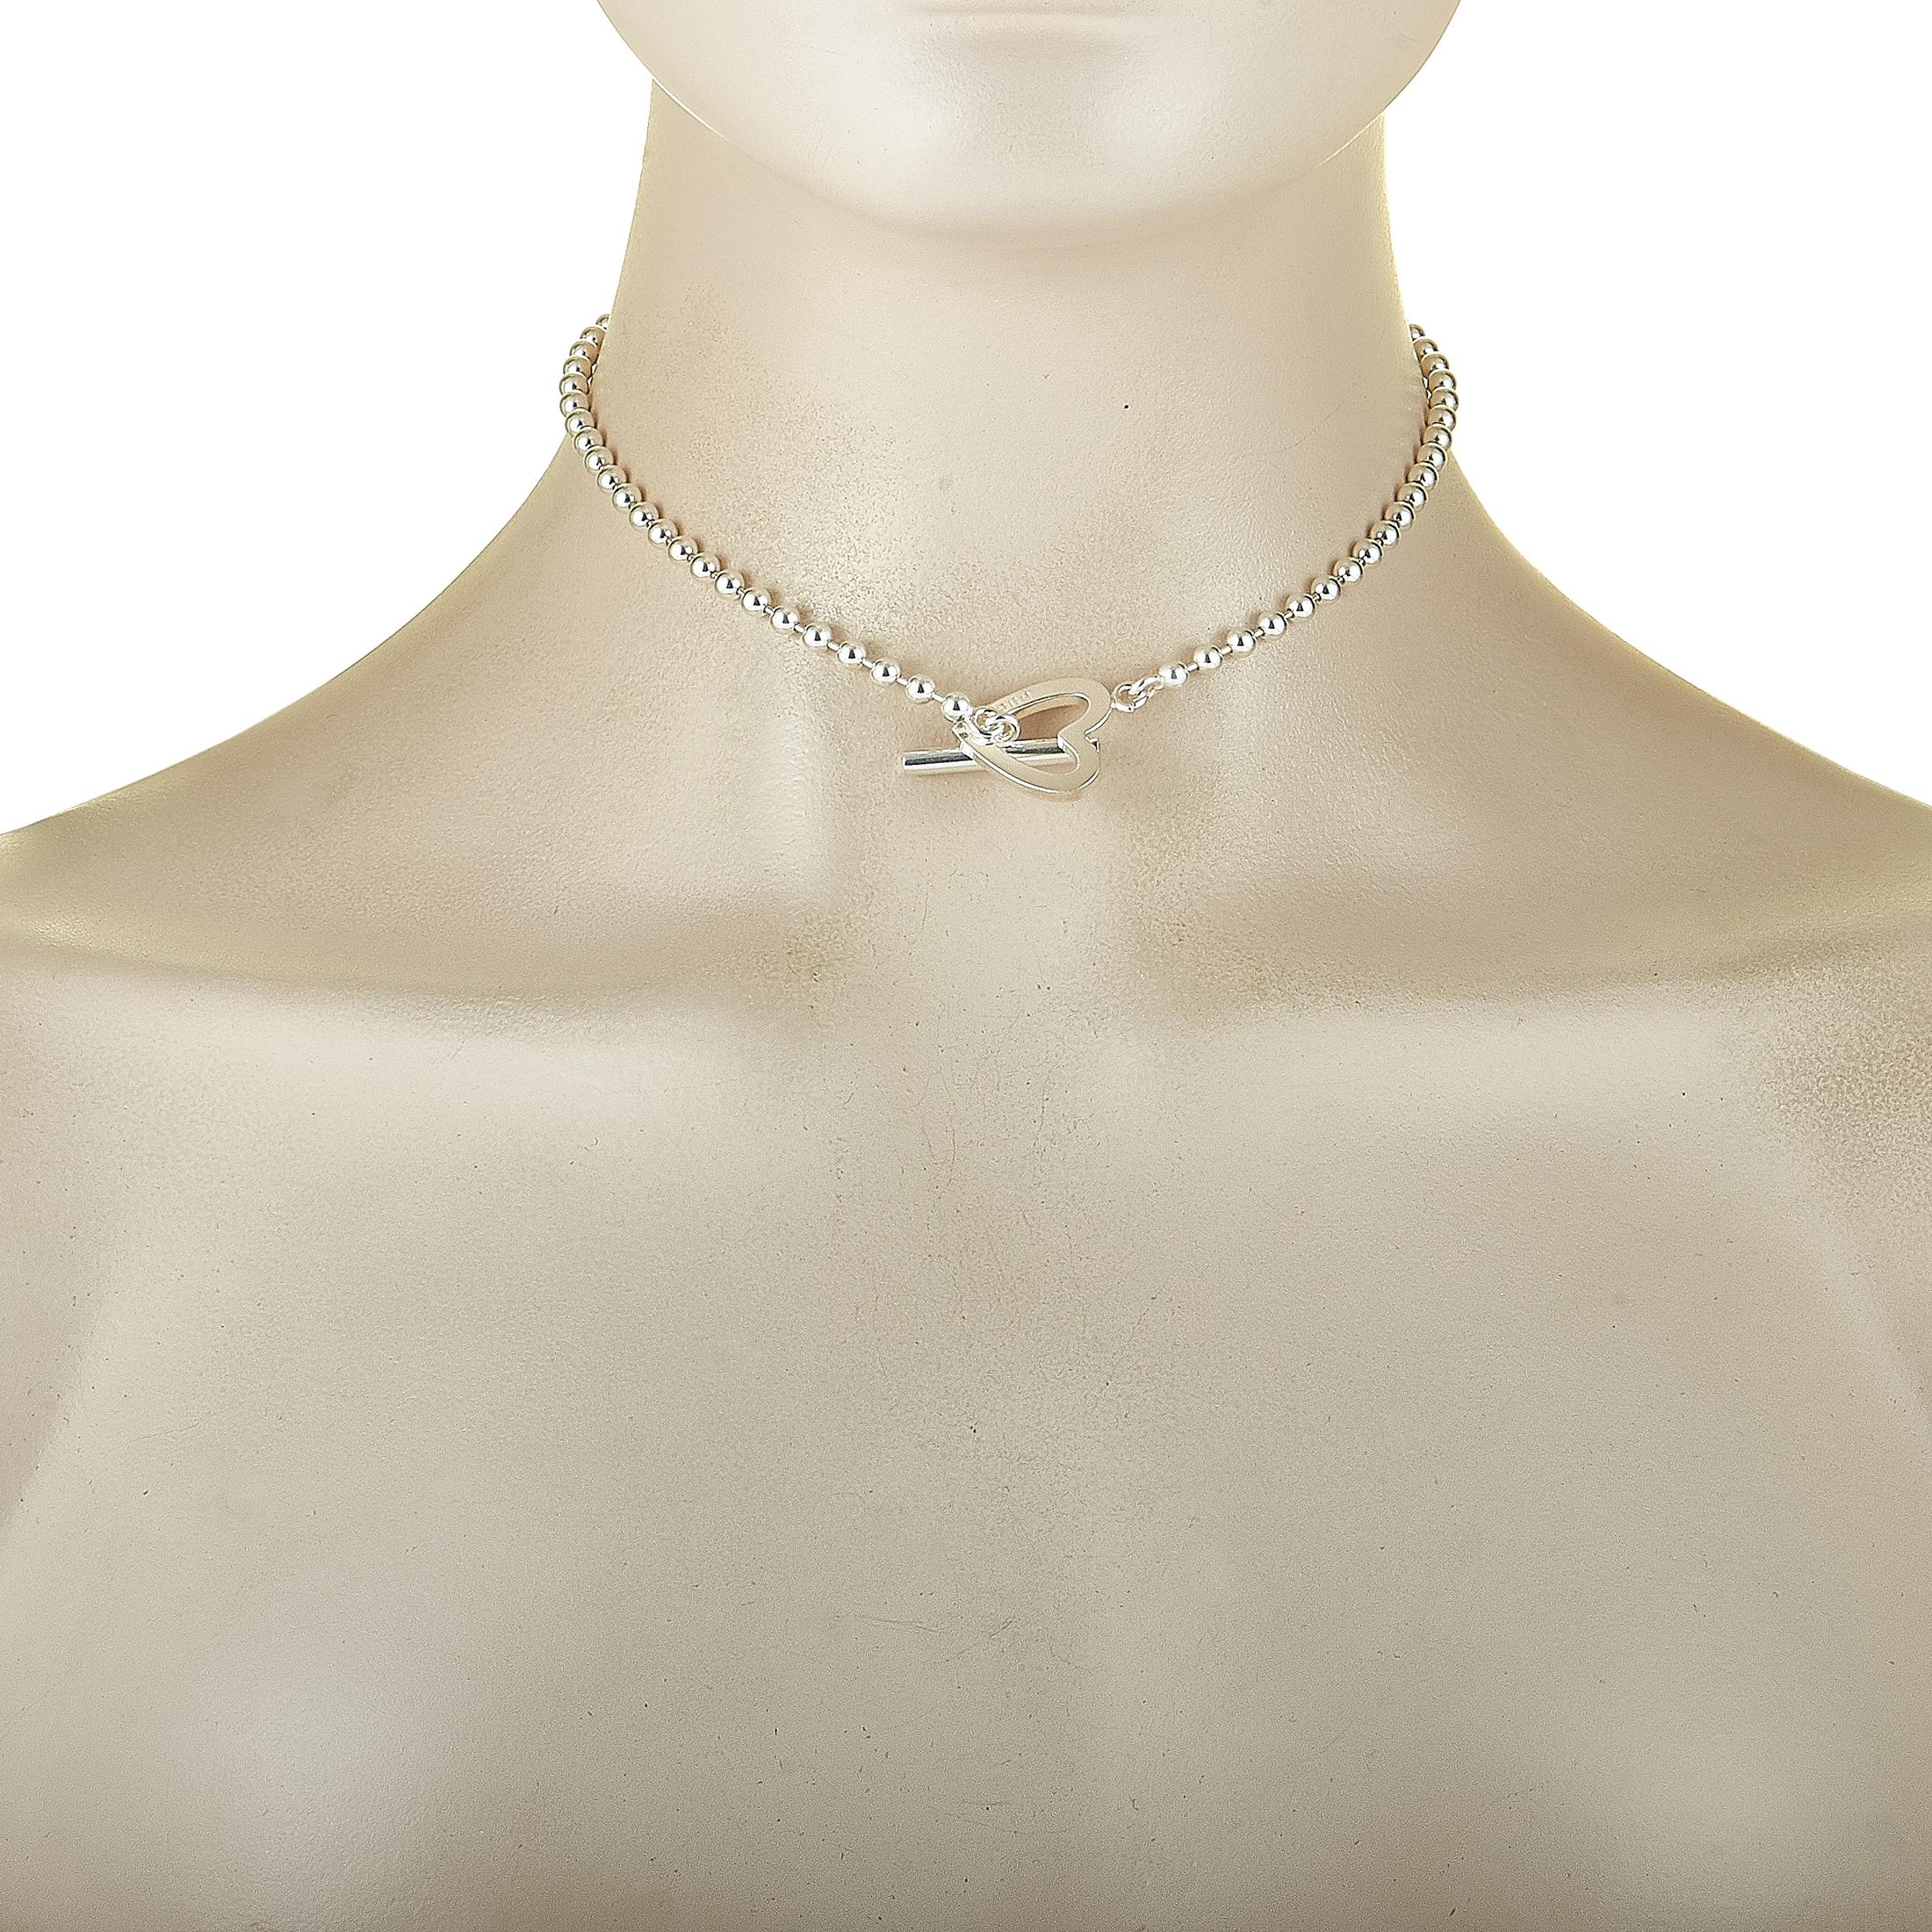 Gucci Silver Toggle Heart Necklace at 